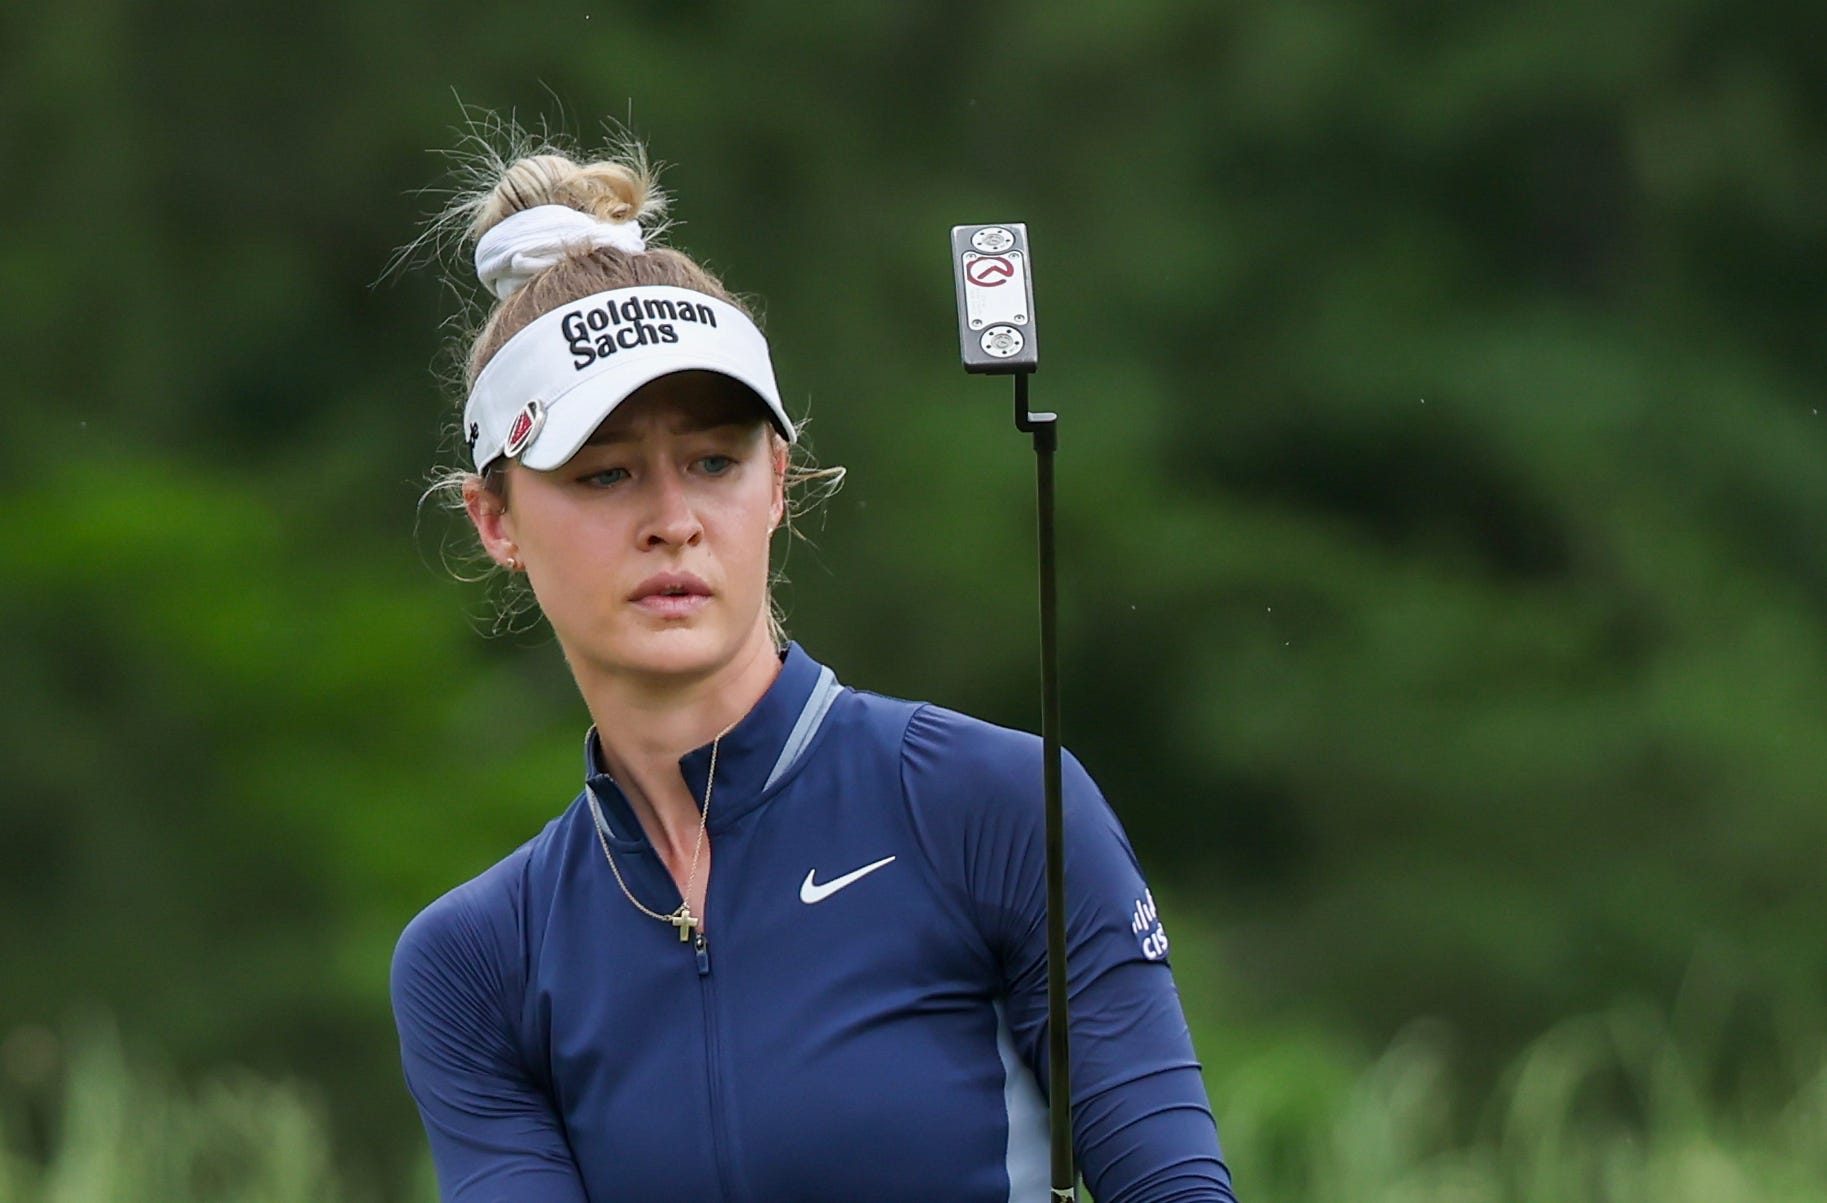 nelly korda, lpga in prime position to lift women's golf. so far, they're whiffing.